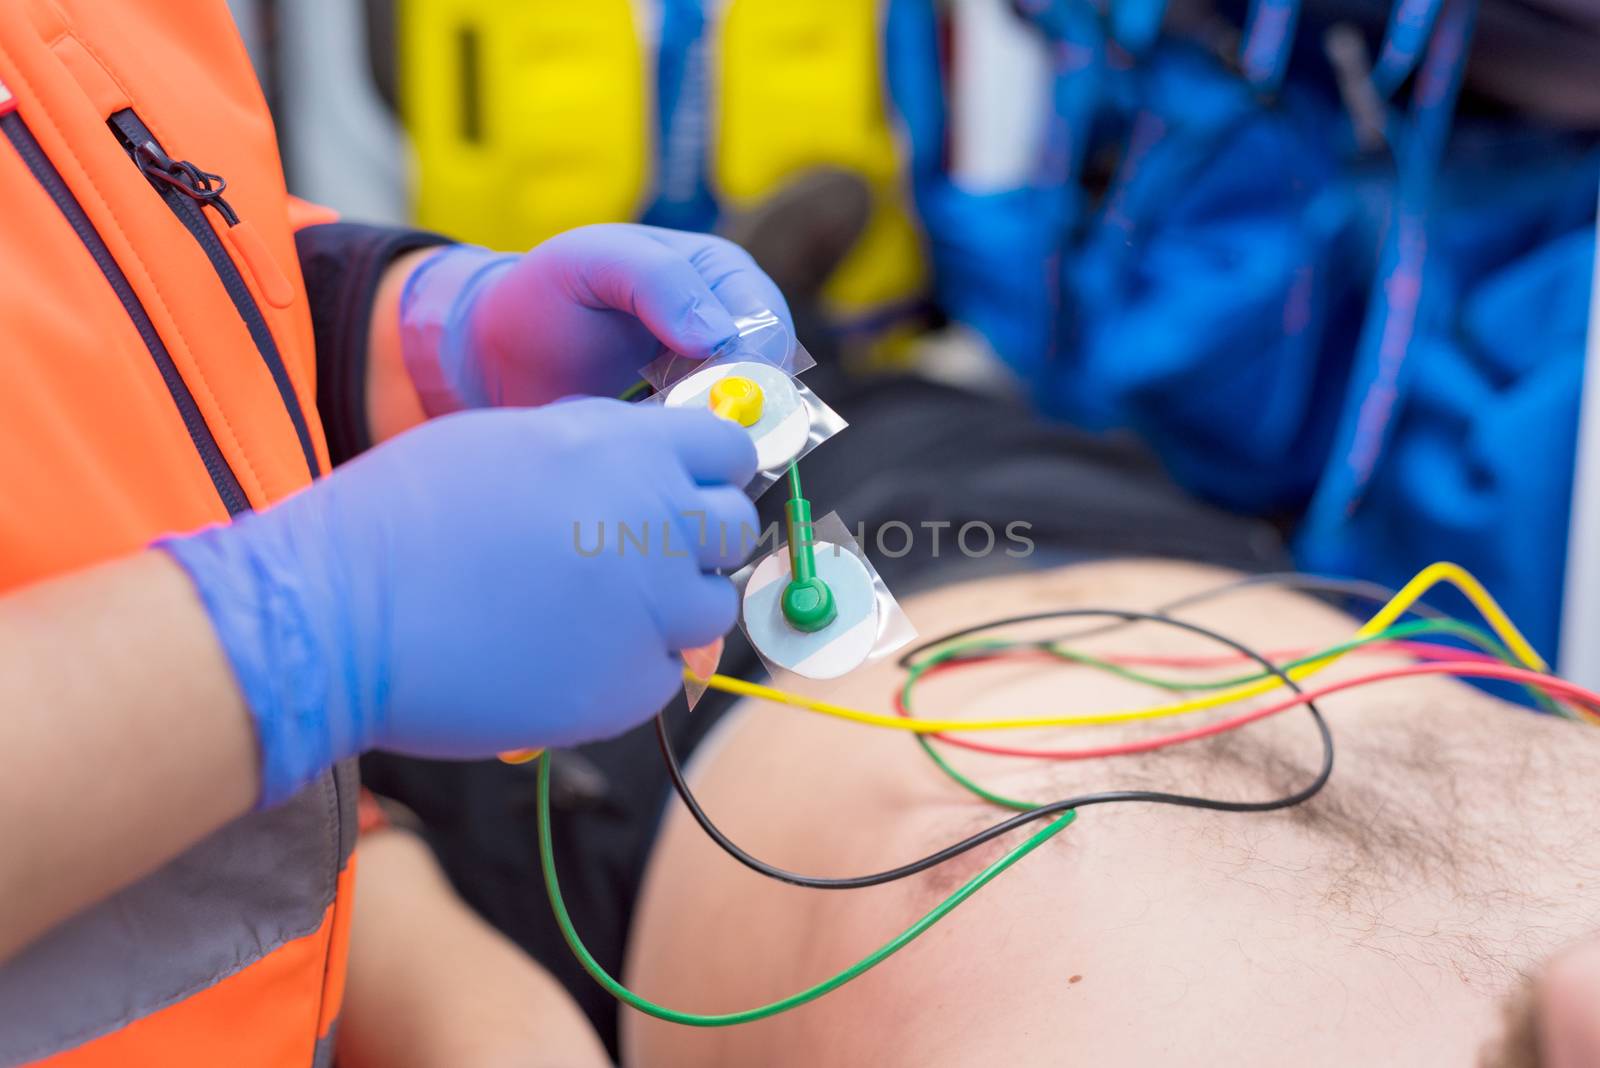 Emergency doctor hands, attaching ecg electrodes on patient chest in ambulance